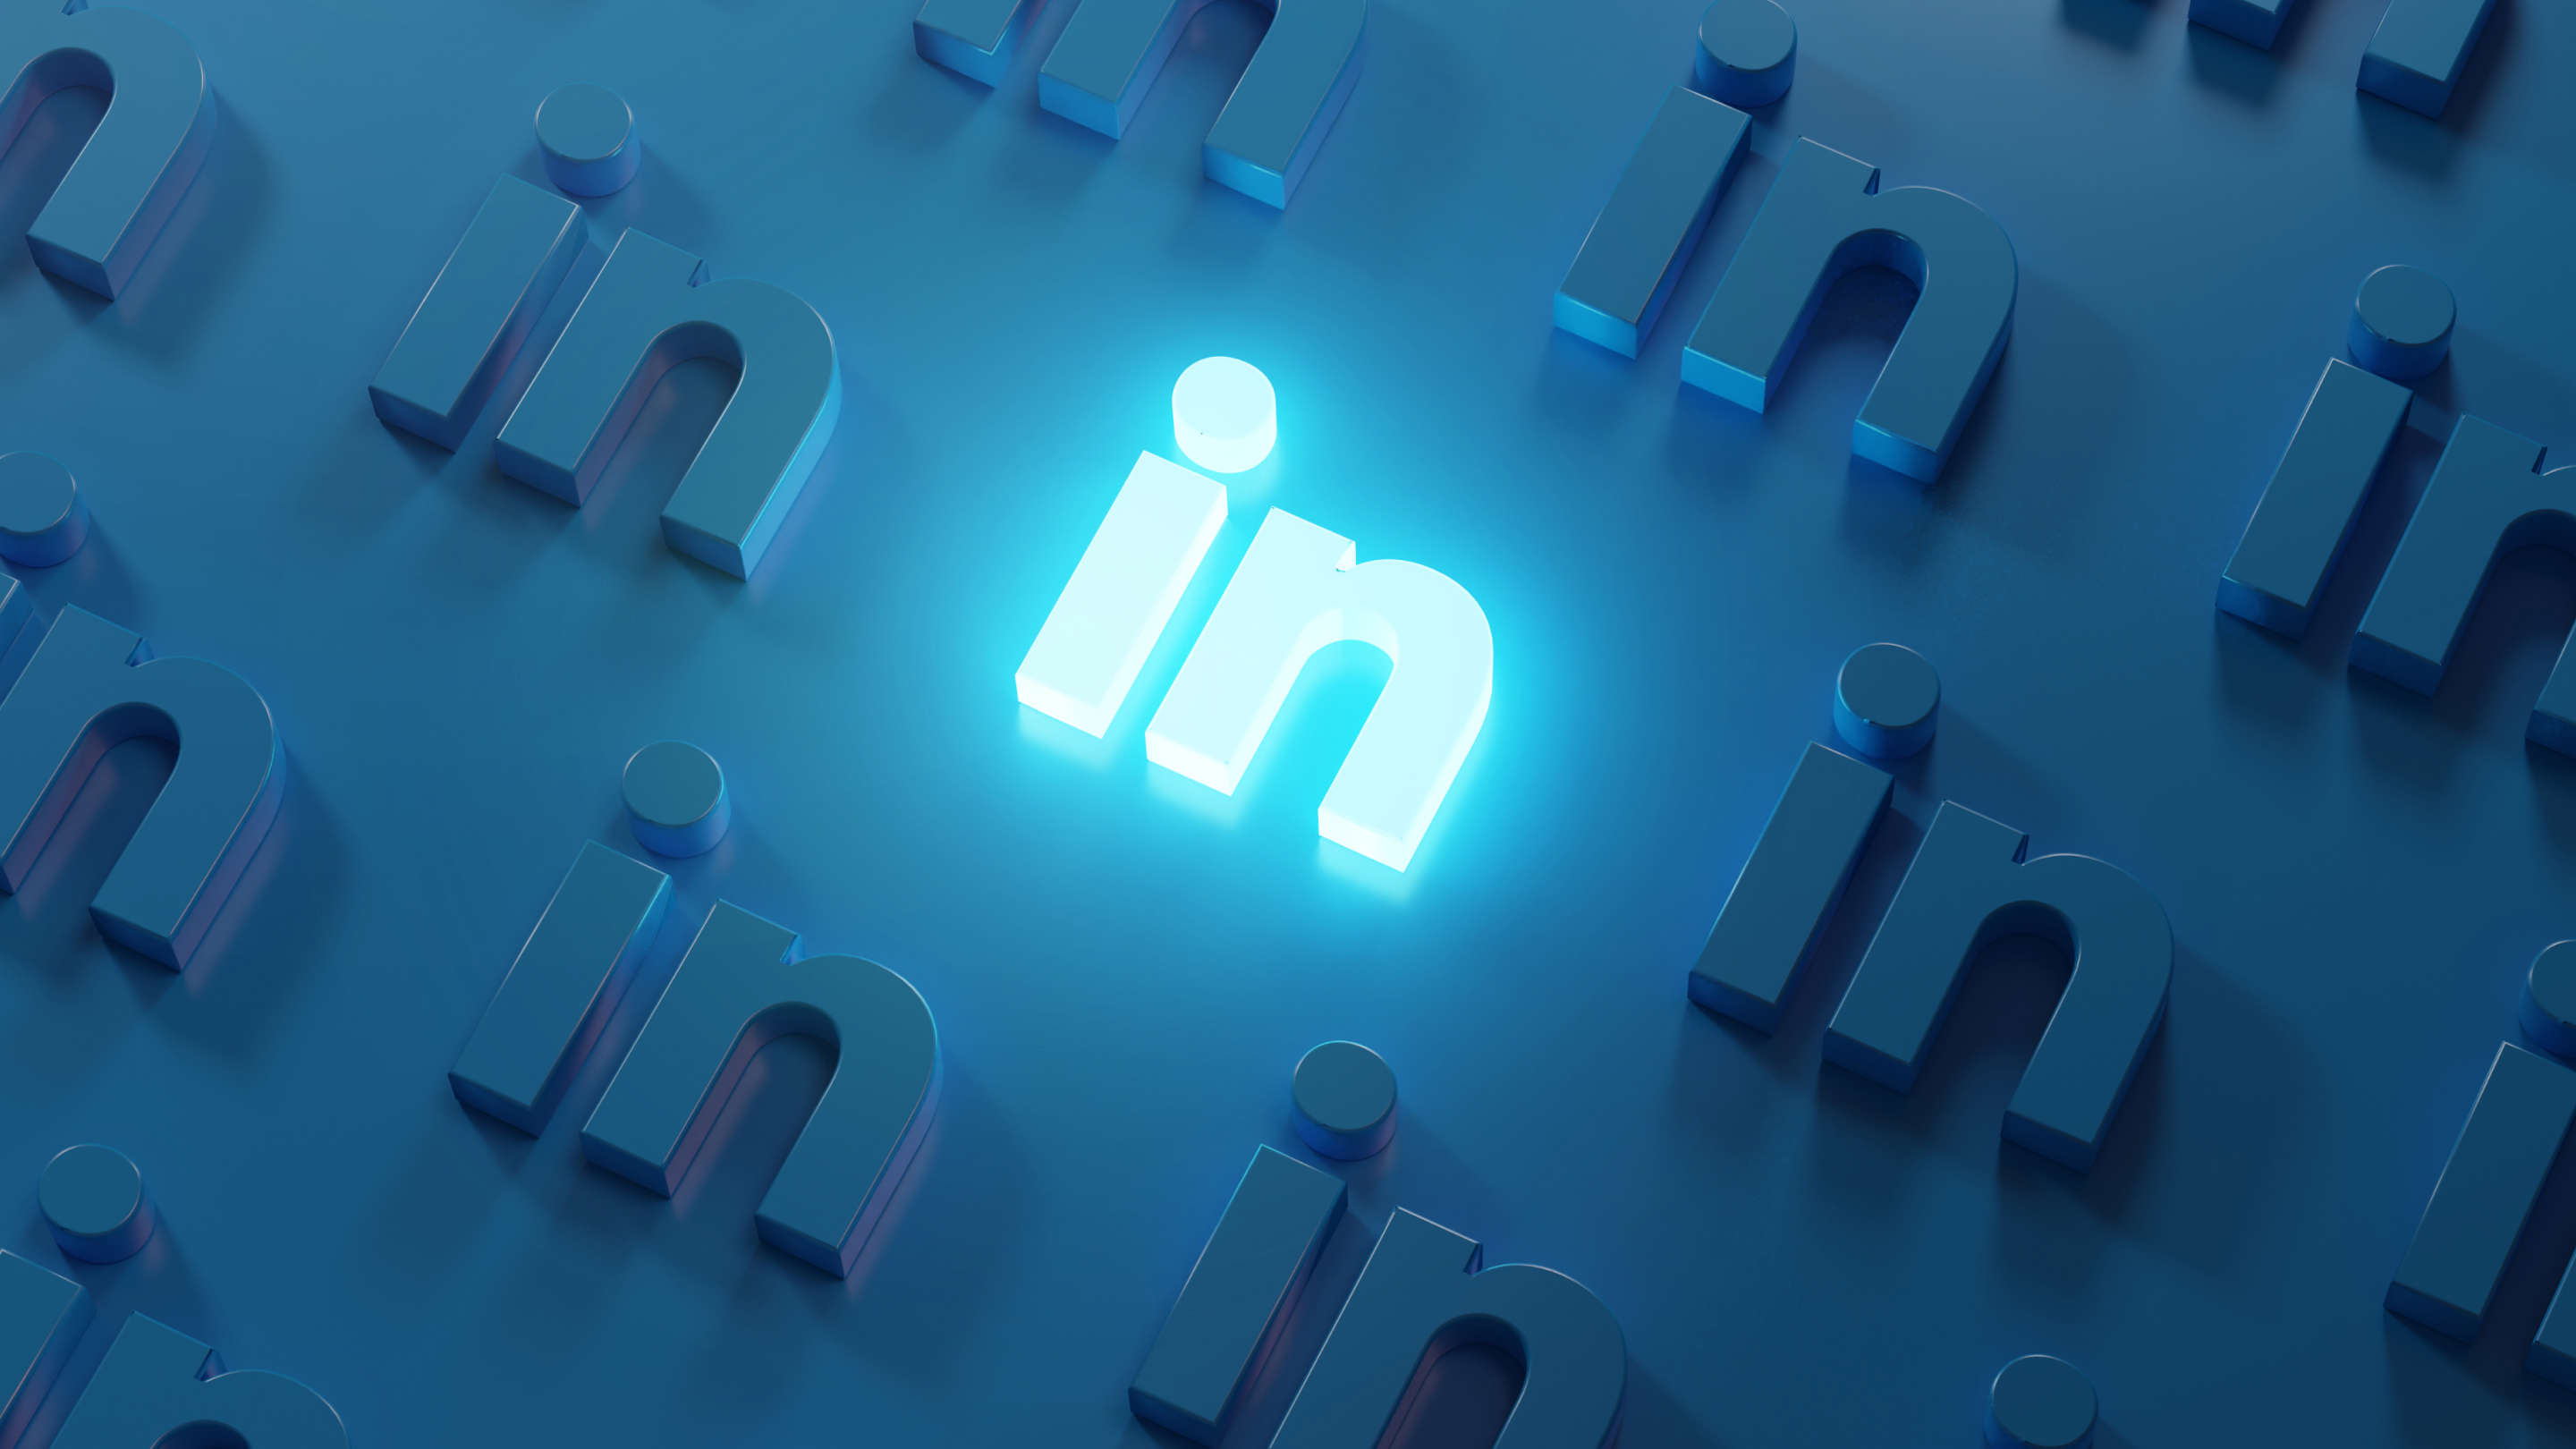 What You Need to Know About Effective B2B Marketing on LinkedIn